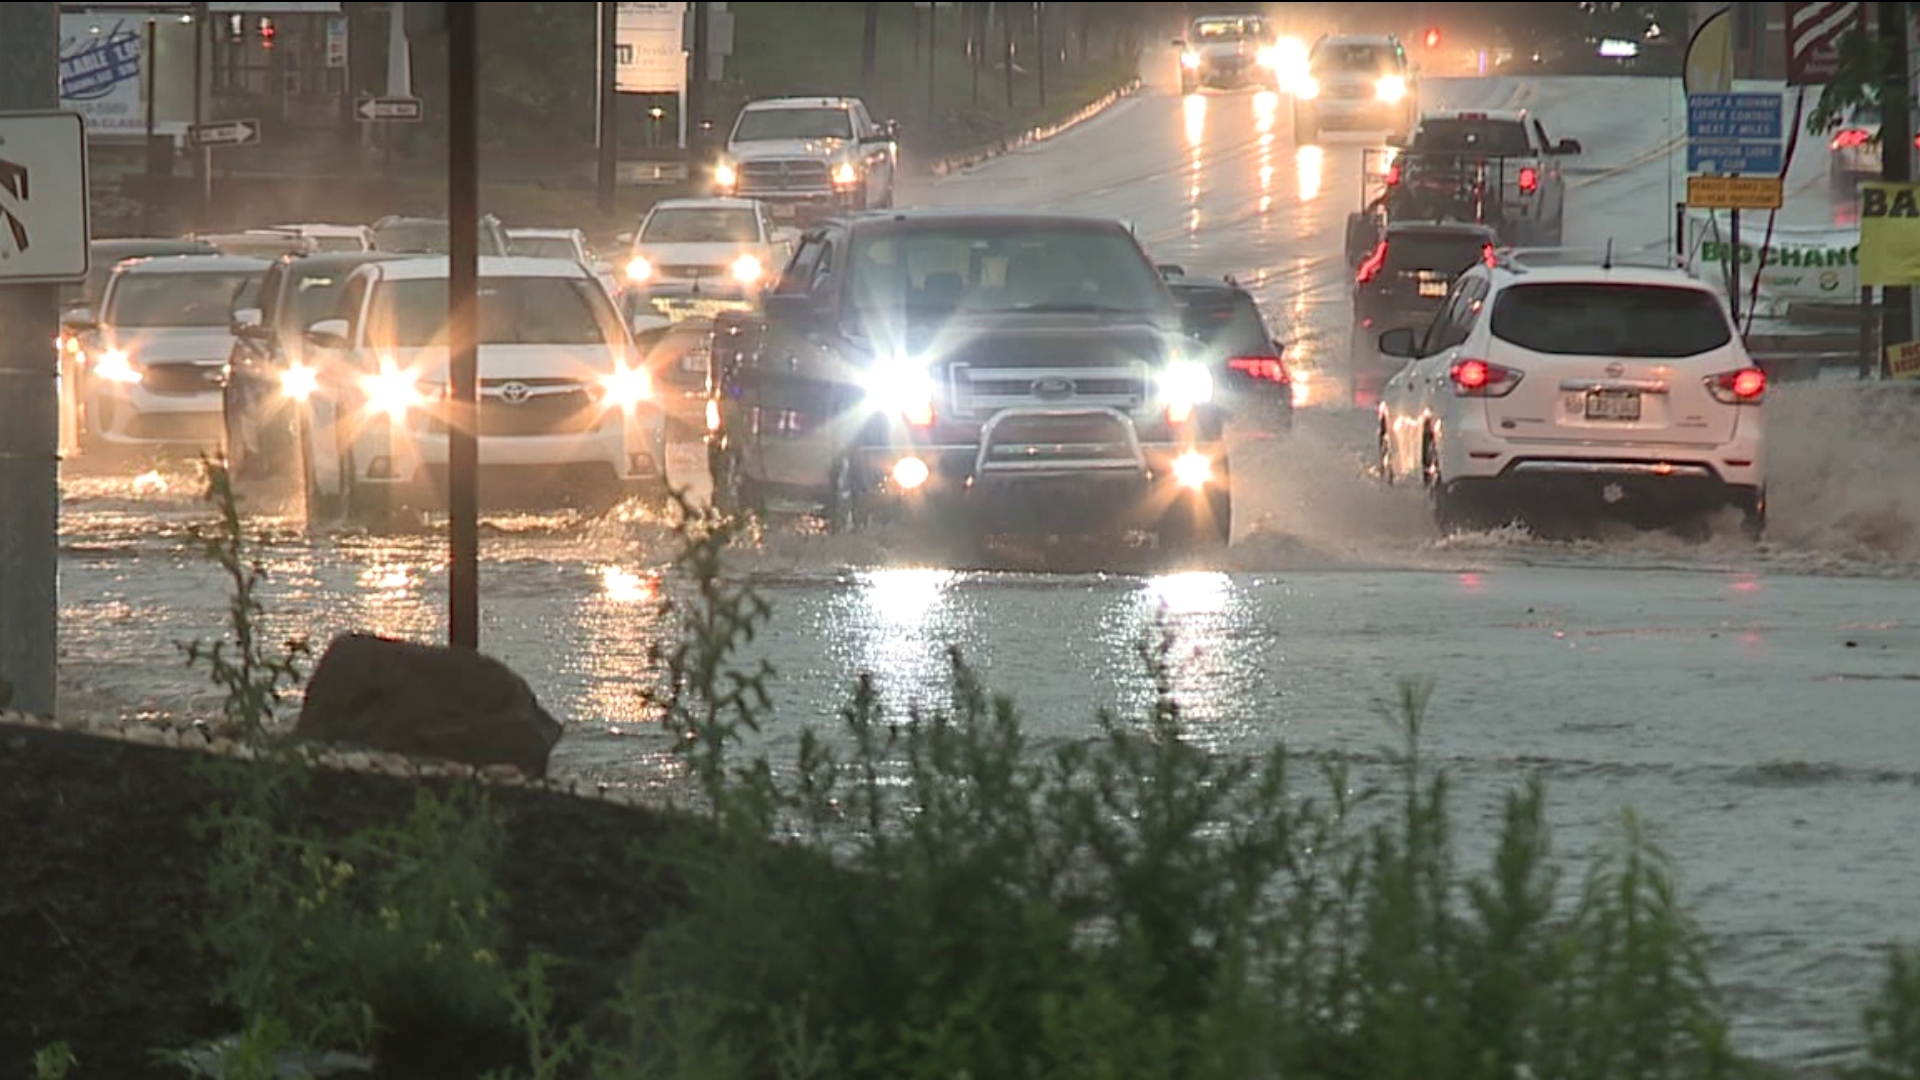 The heavy rain that many of us saw earlier this evening knocked out power to thousands of homes and businesses and flooded roads across the area.